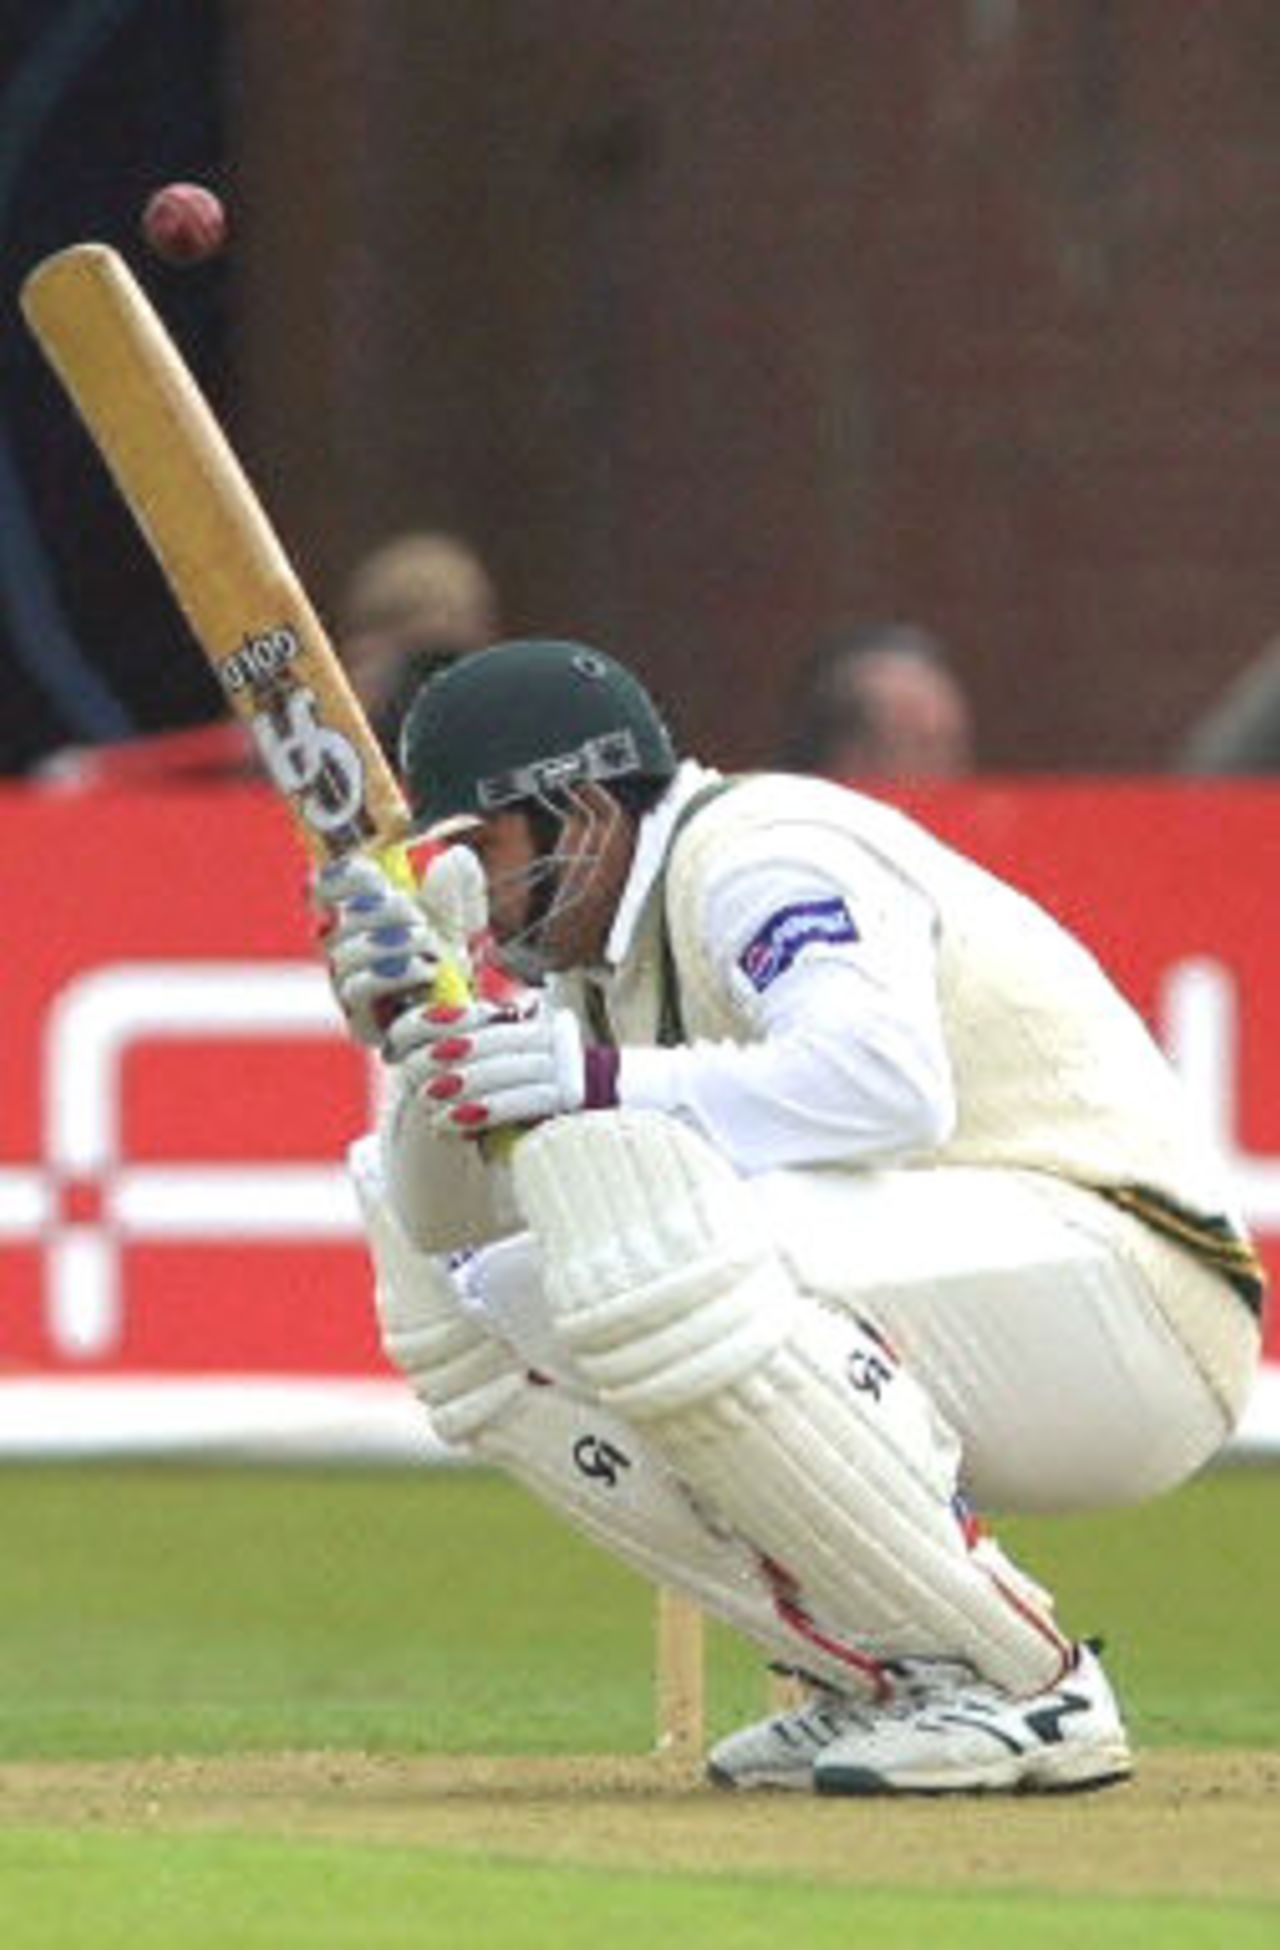 Inzamam-ul-Haq ducks out of the way of a delivery, day 1, 2nd Test at Old Trafford, 31 May - 4 June 2001.